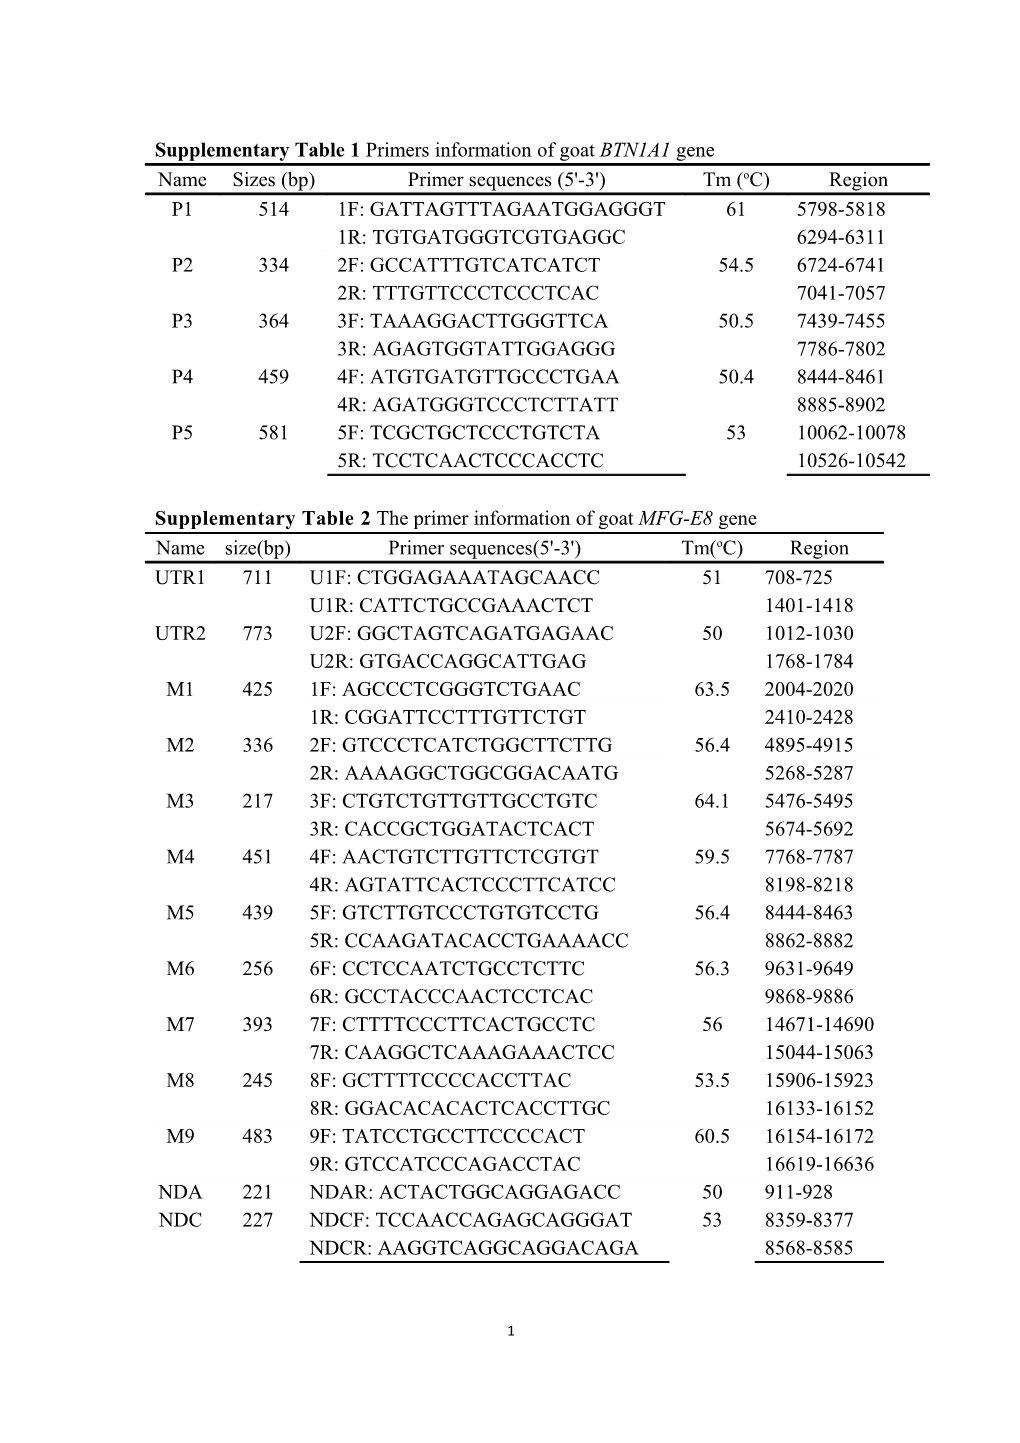 Supplementary Table 1 Primers Information of Goat BTN1A1 Gene